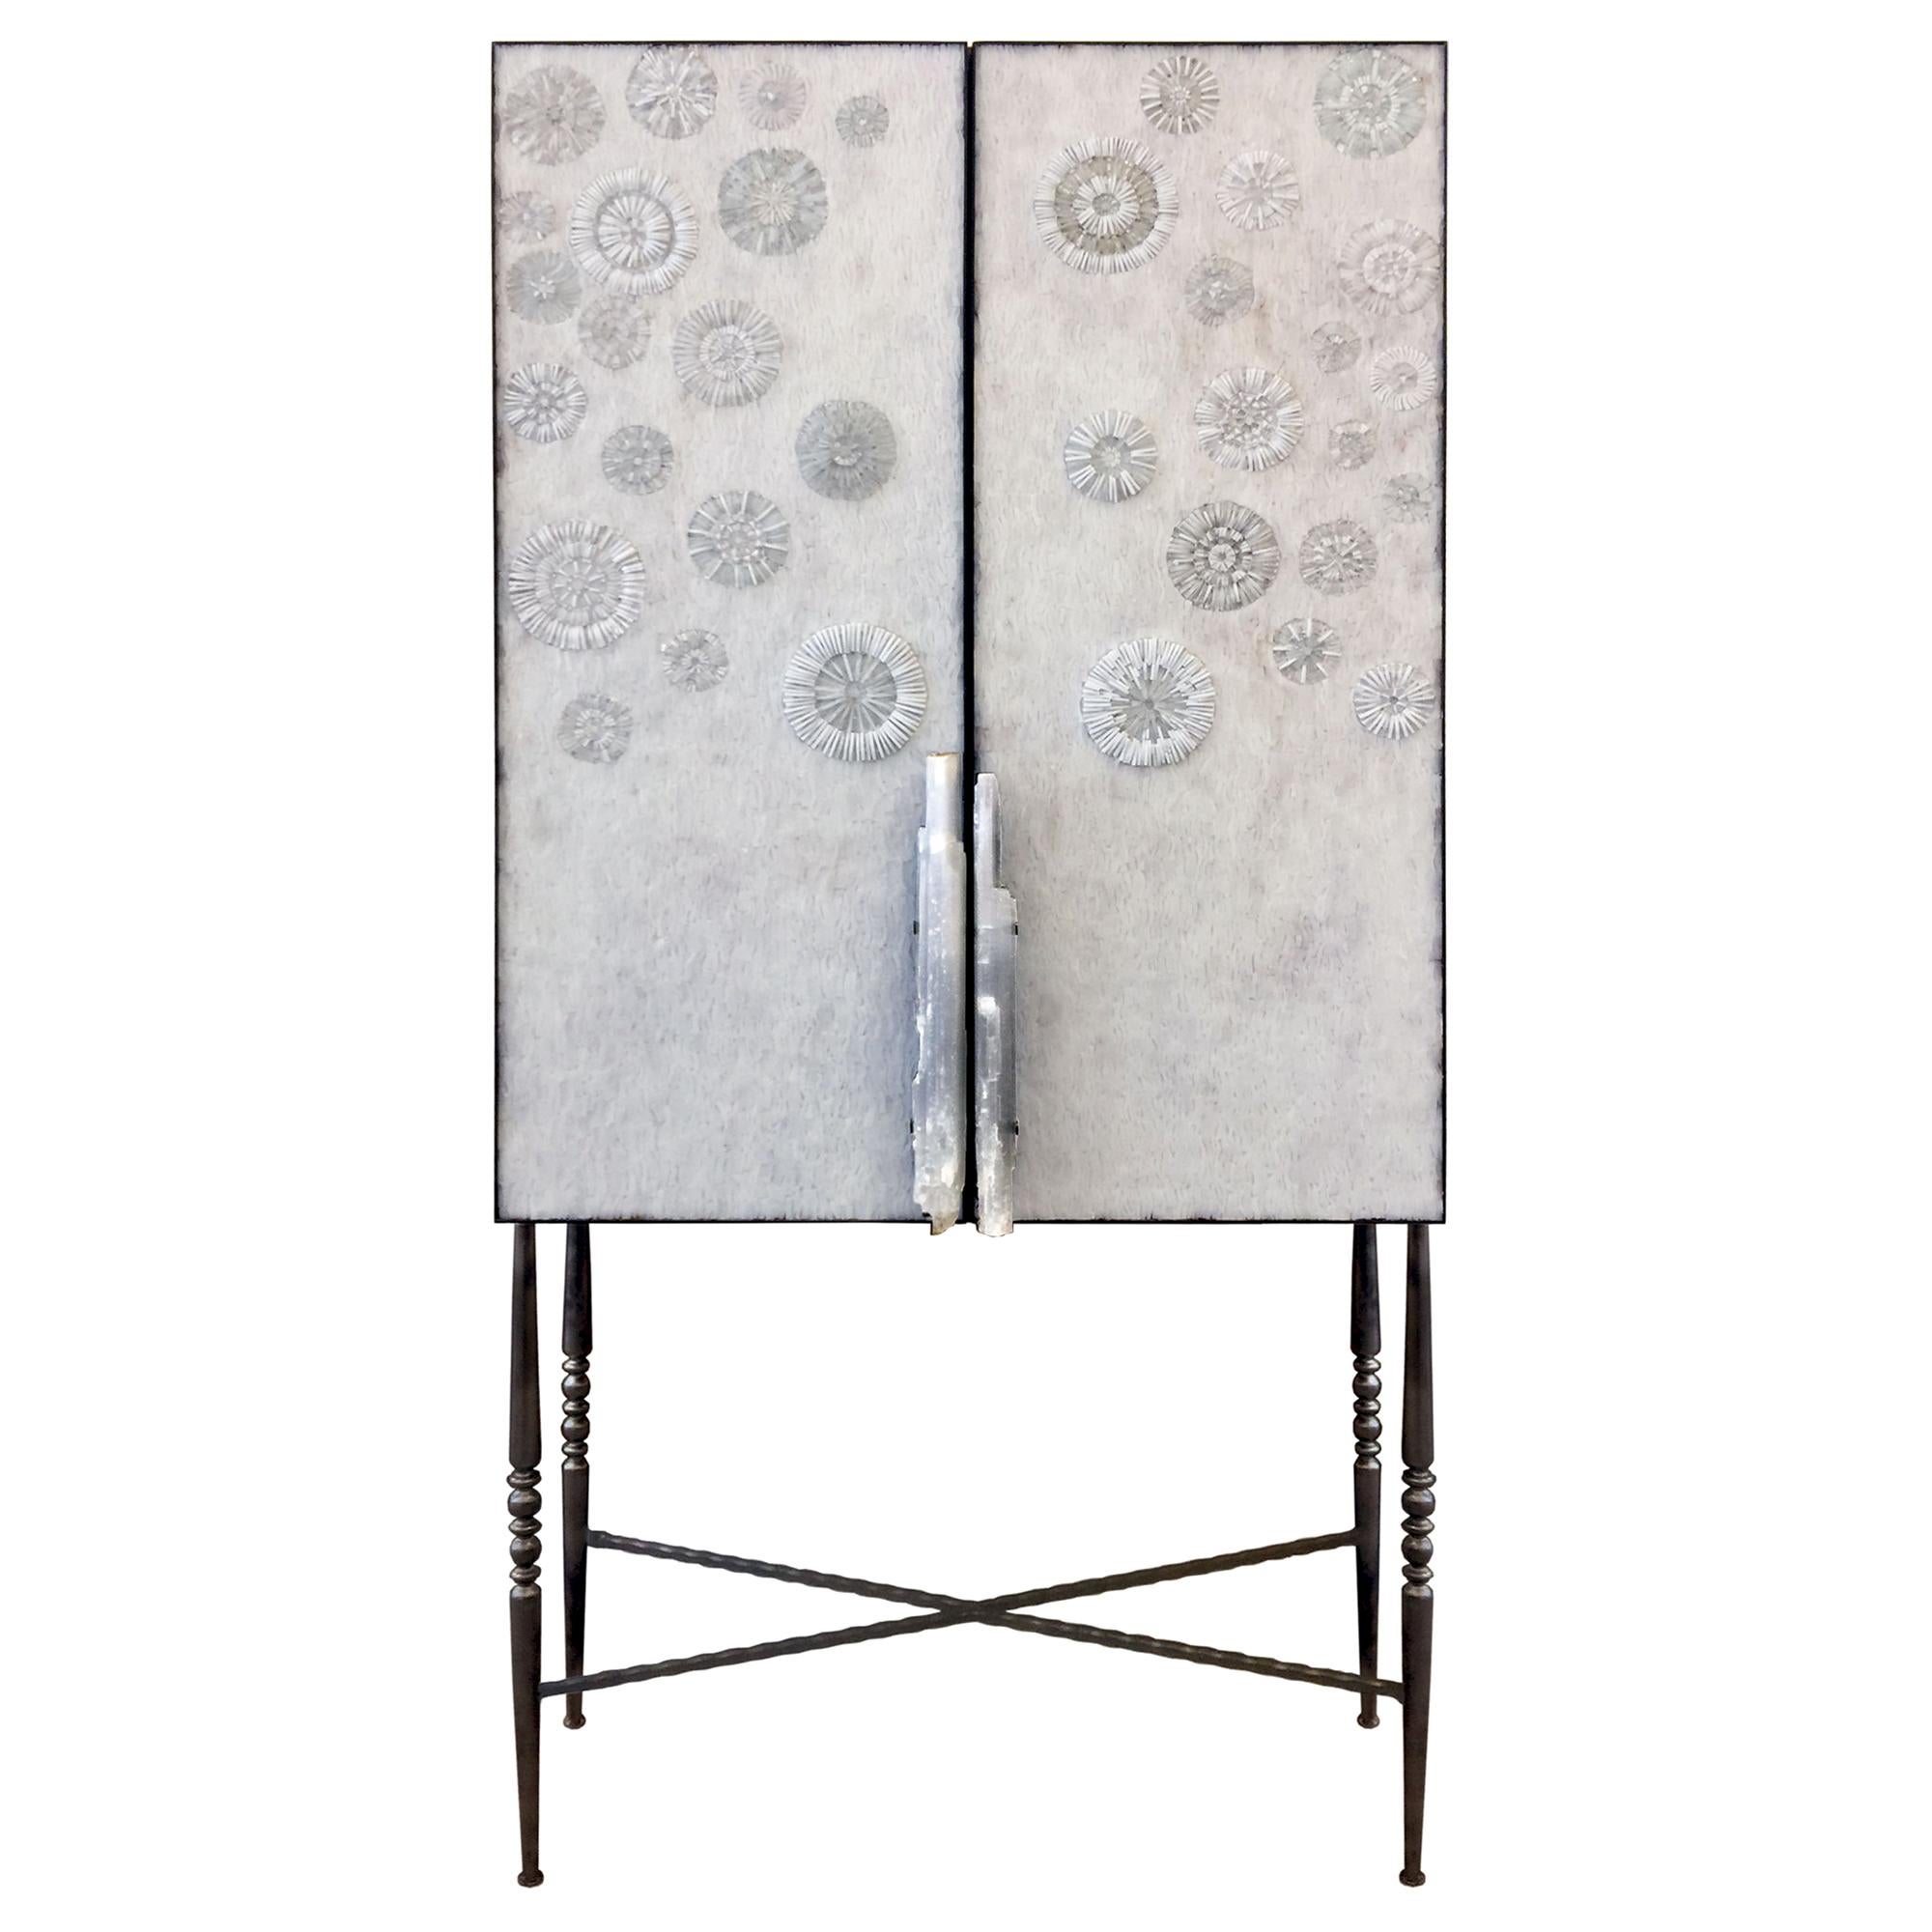 Customizable White Blossom Glass Mosaic Bar with Selenite Handles by Ercole Home